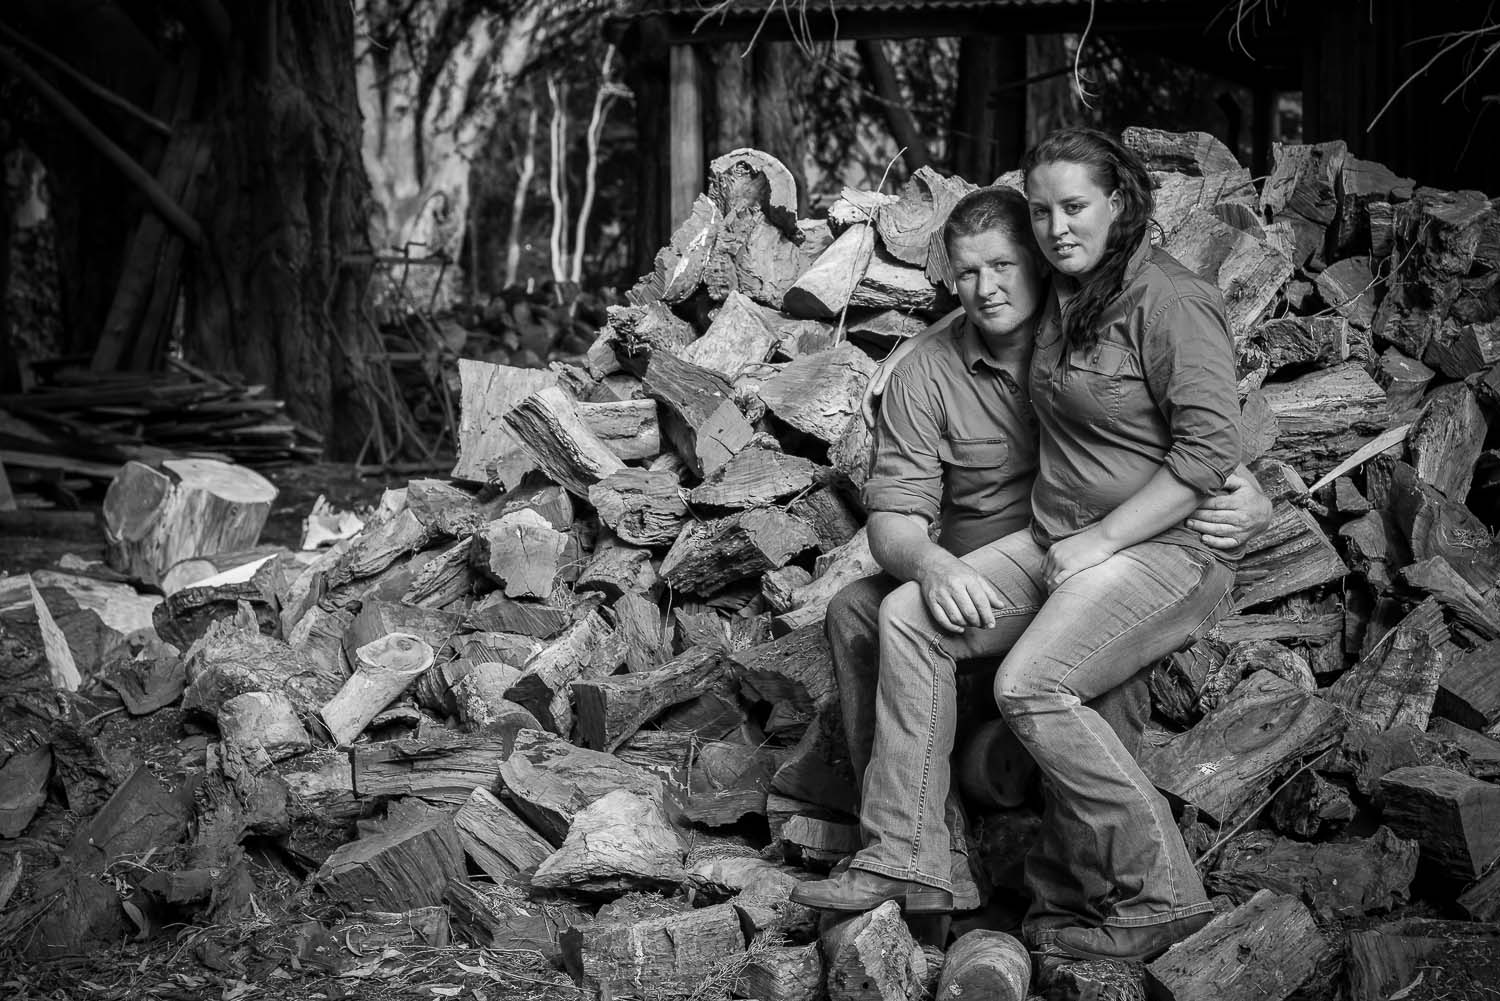 Couple pictured on wood pile